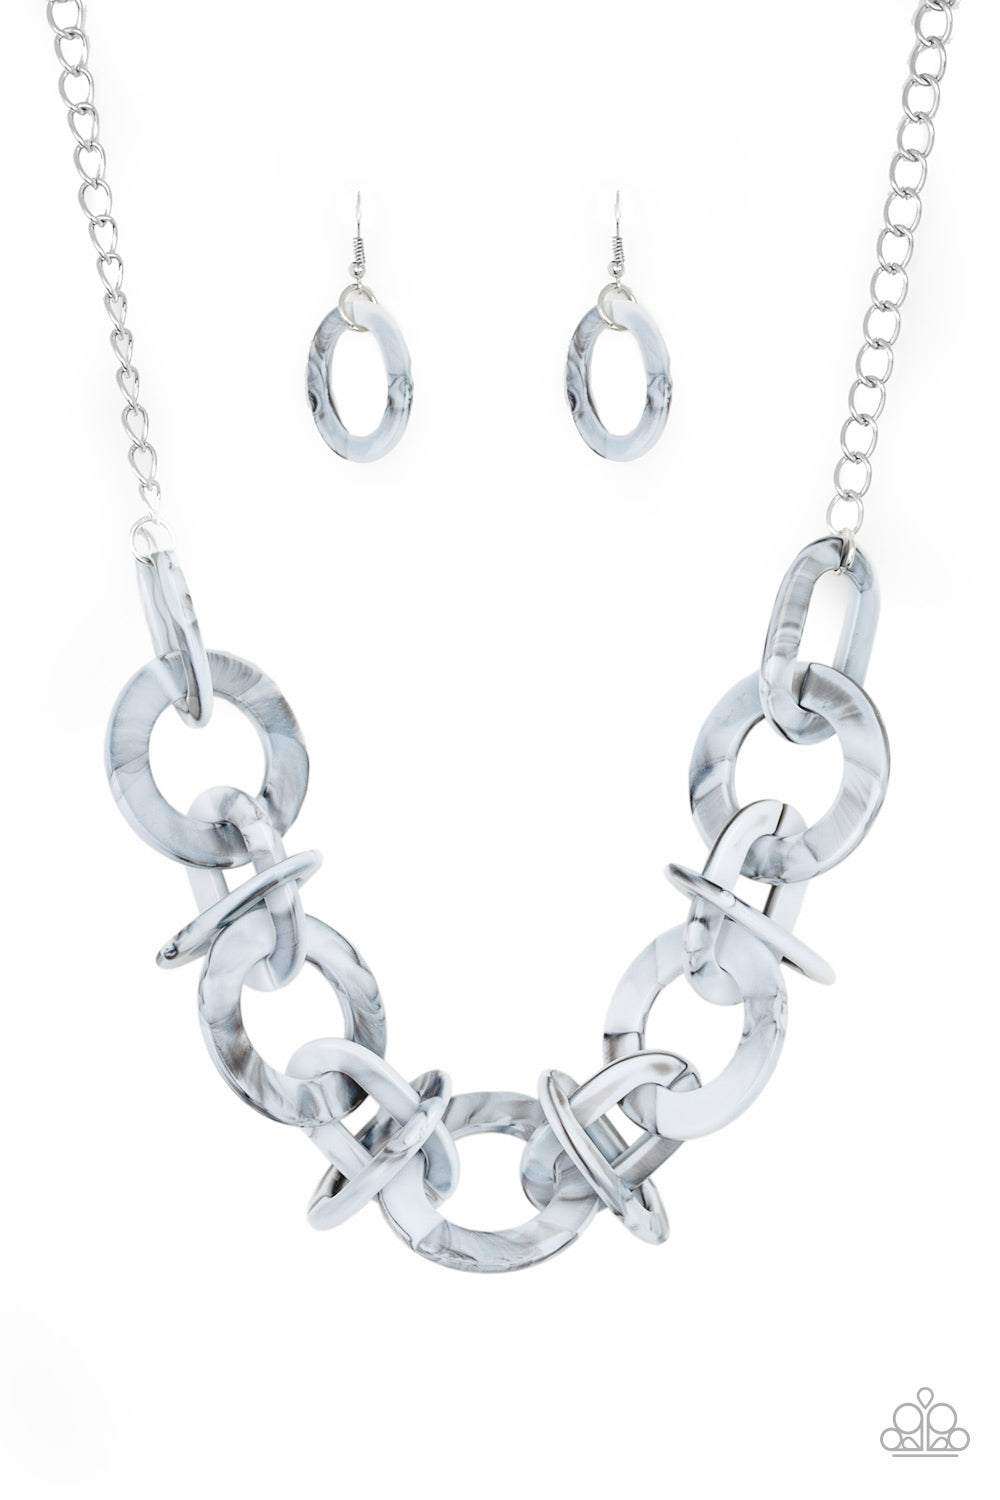 five-dollar-jewelry-chromatic-charm-silver-necklace-paparazzi-accessories